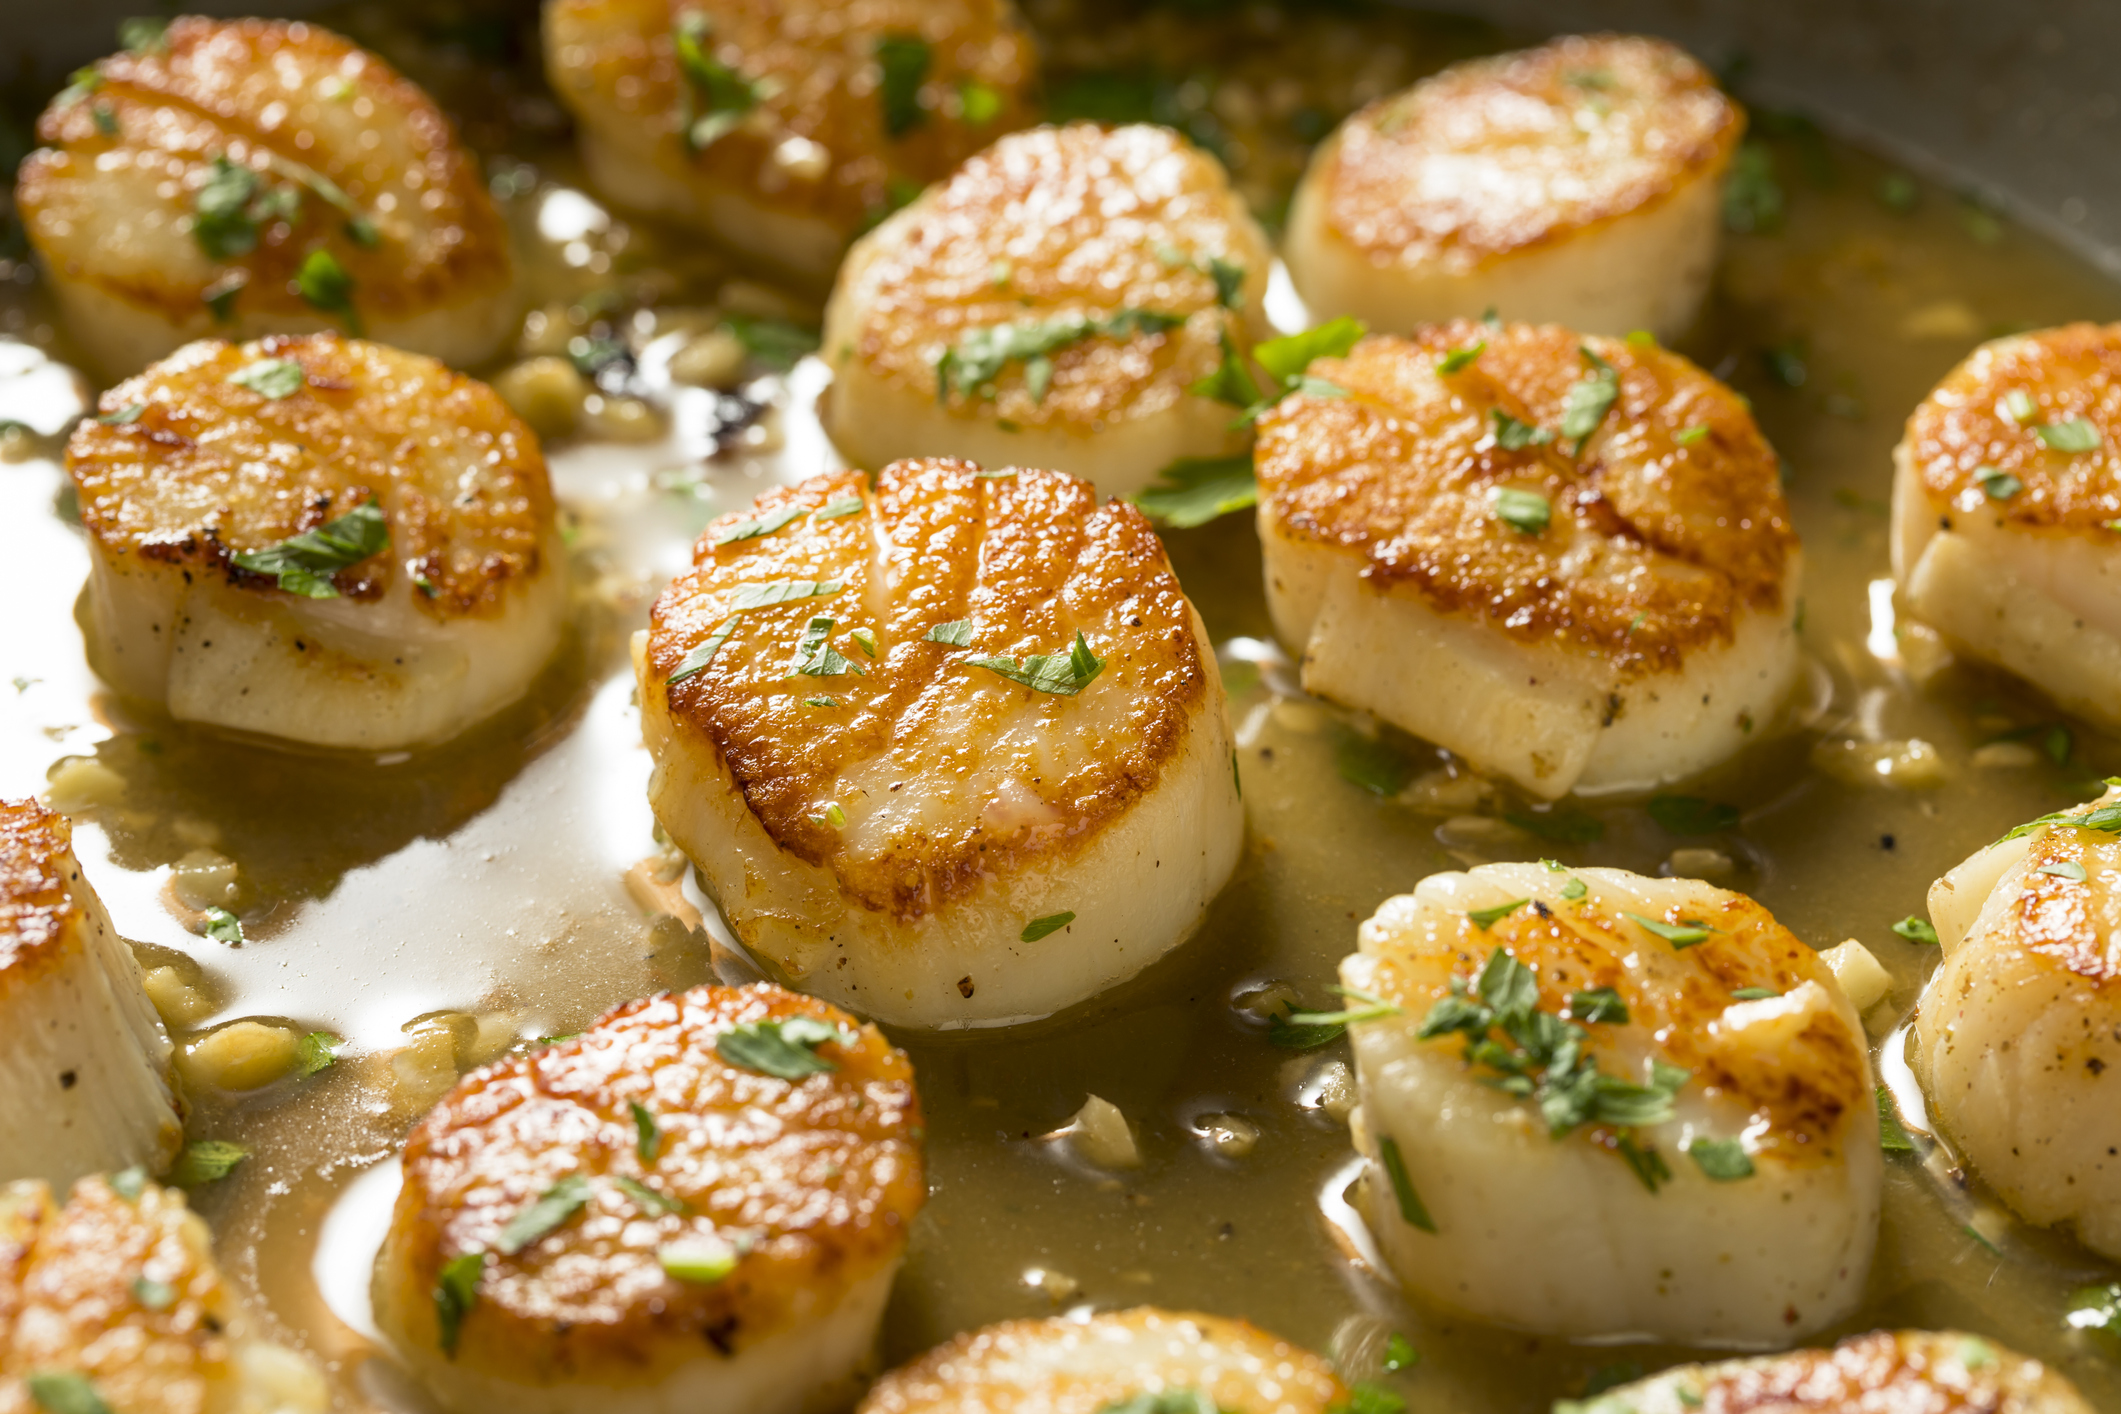 Panned Seared Scallops in Broth